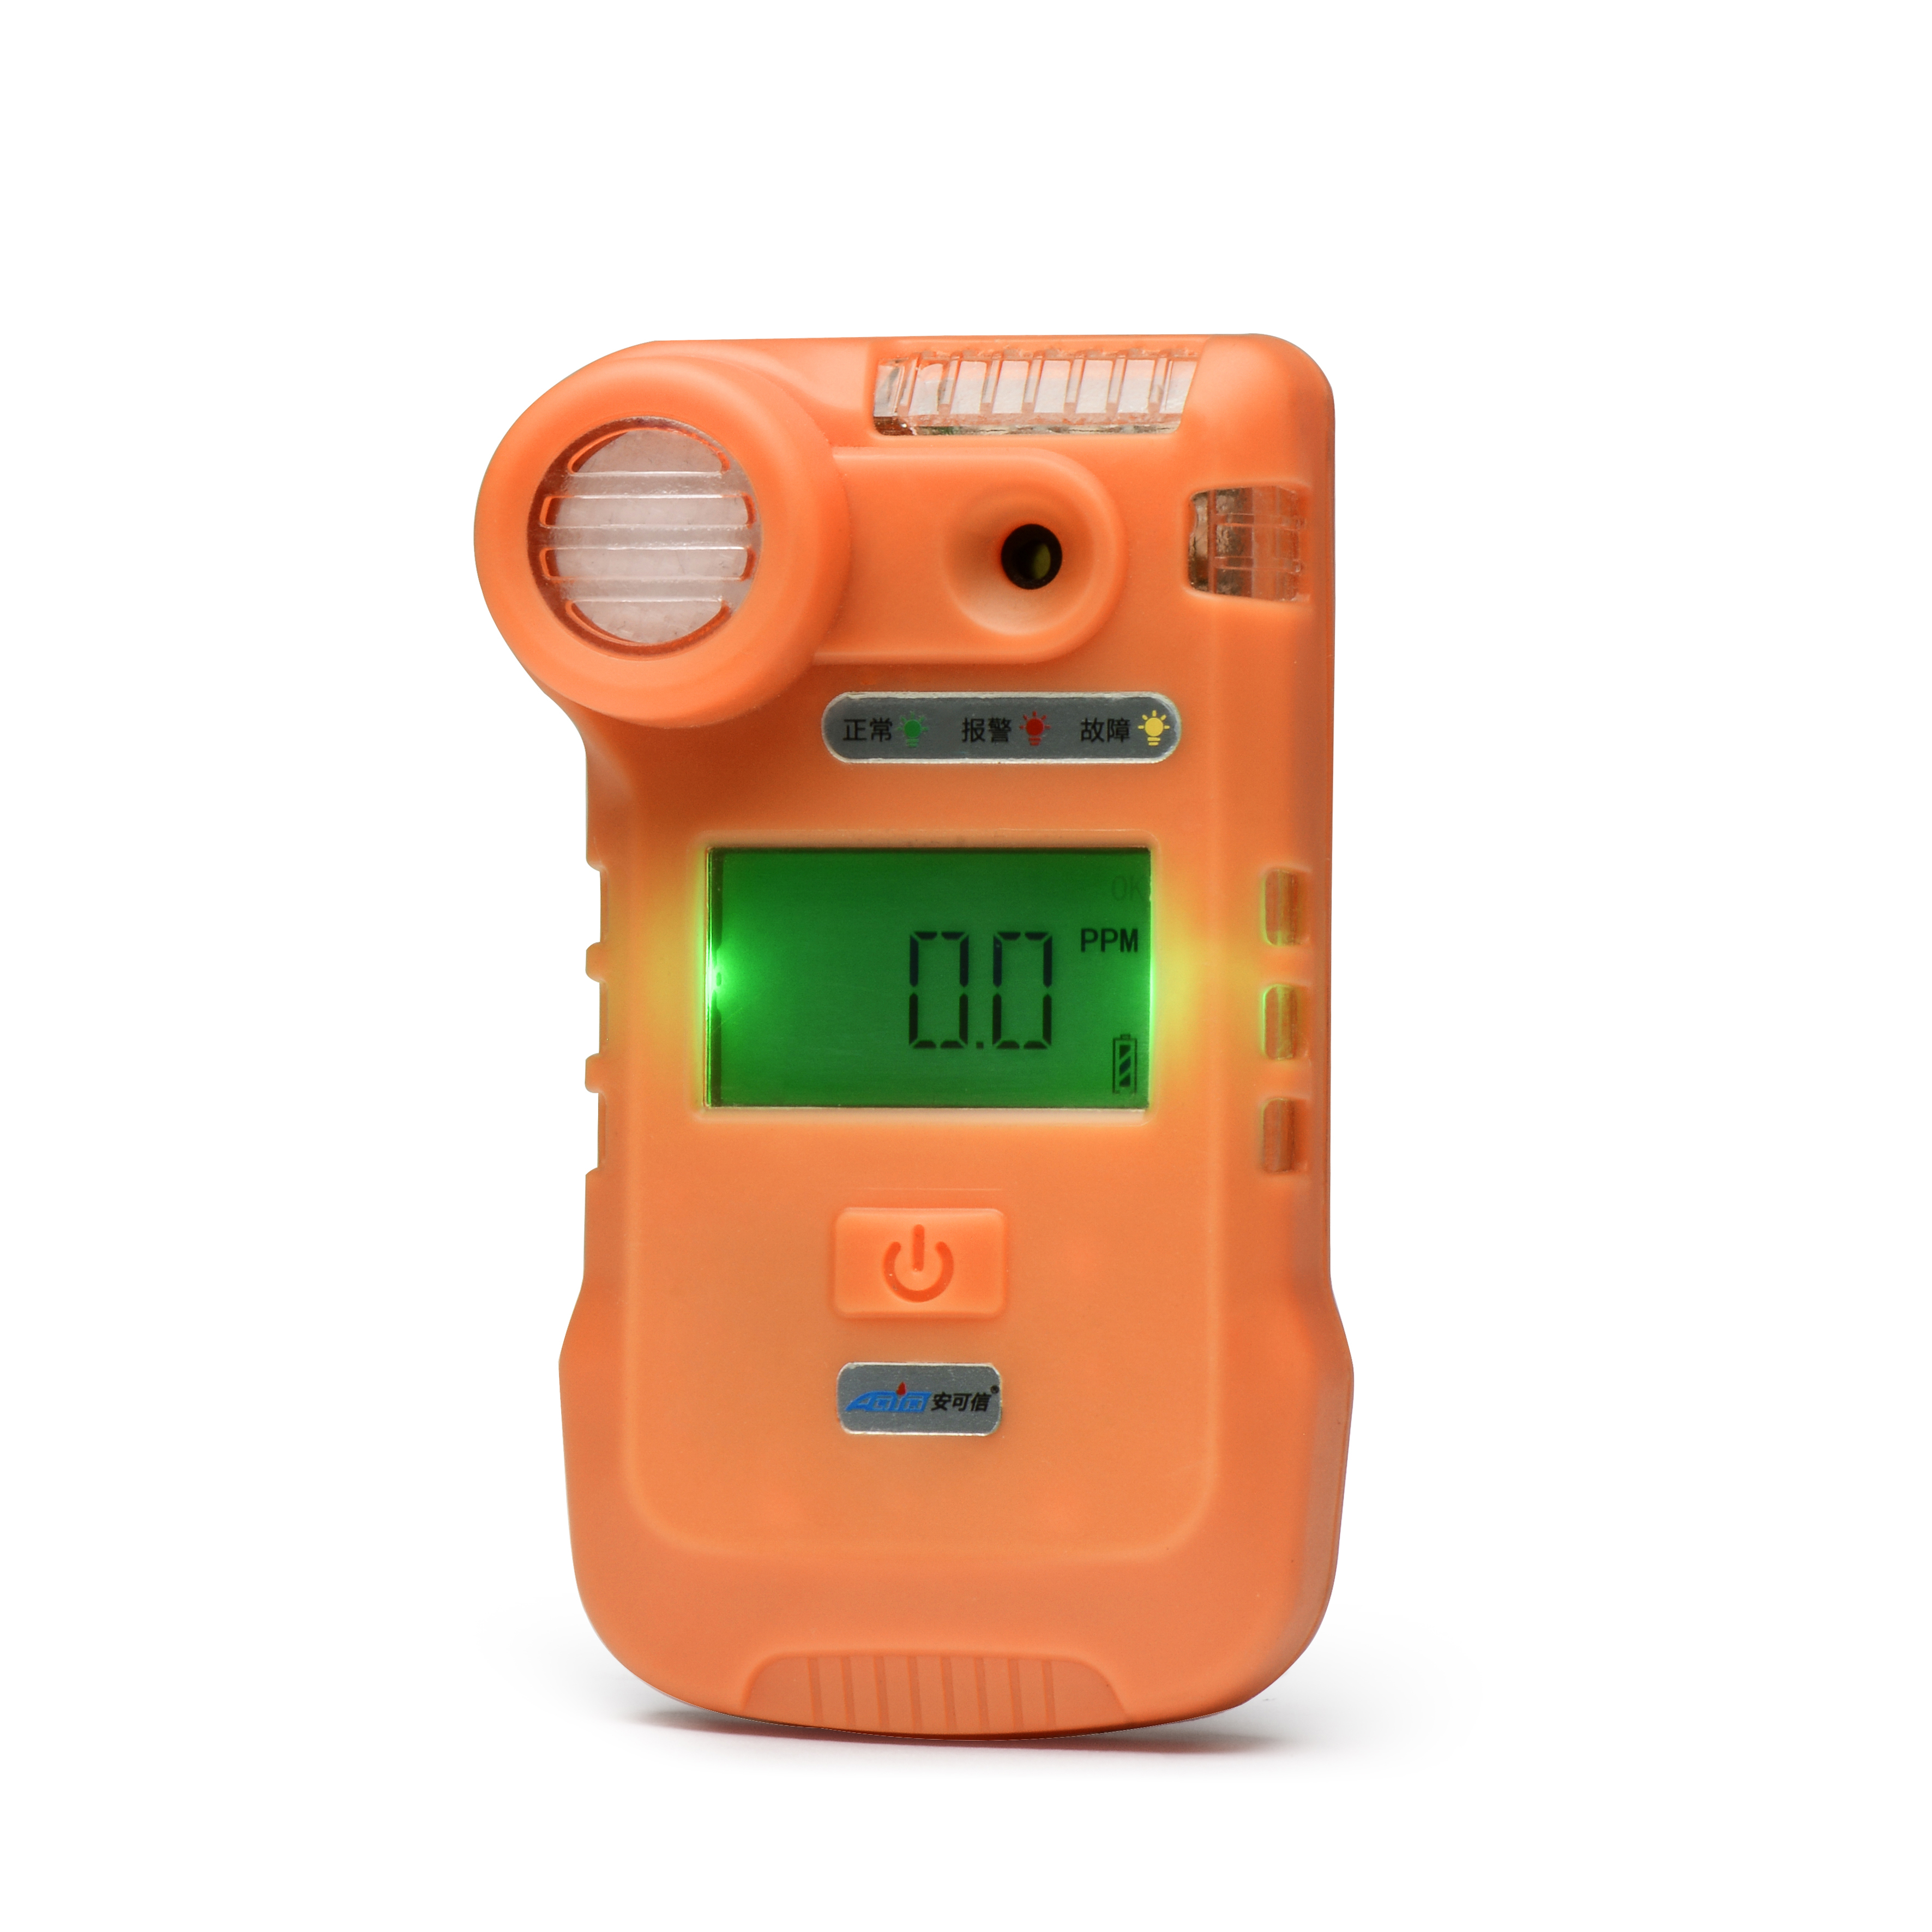 BT-AEC2387 Portable Single Gas Detector Featured Image